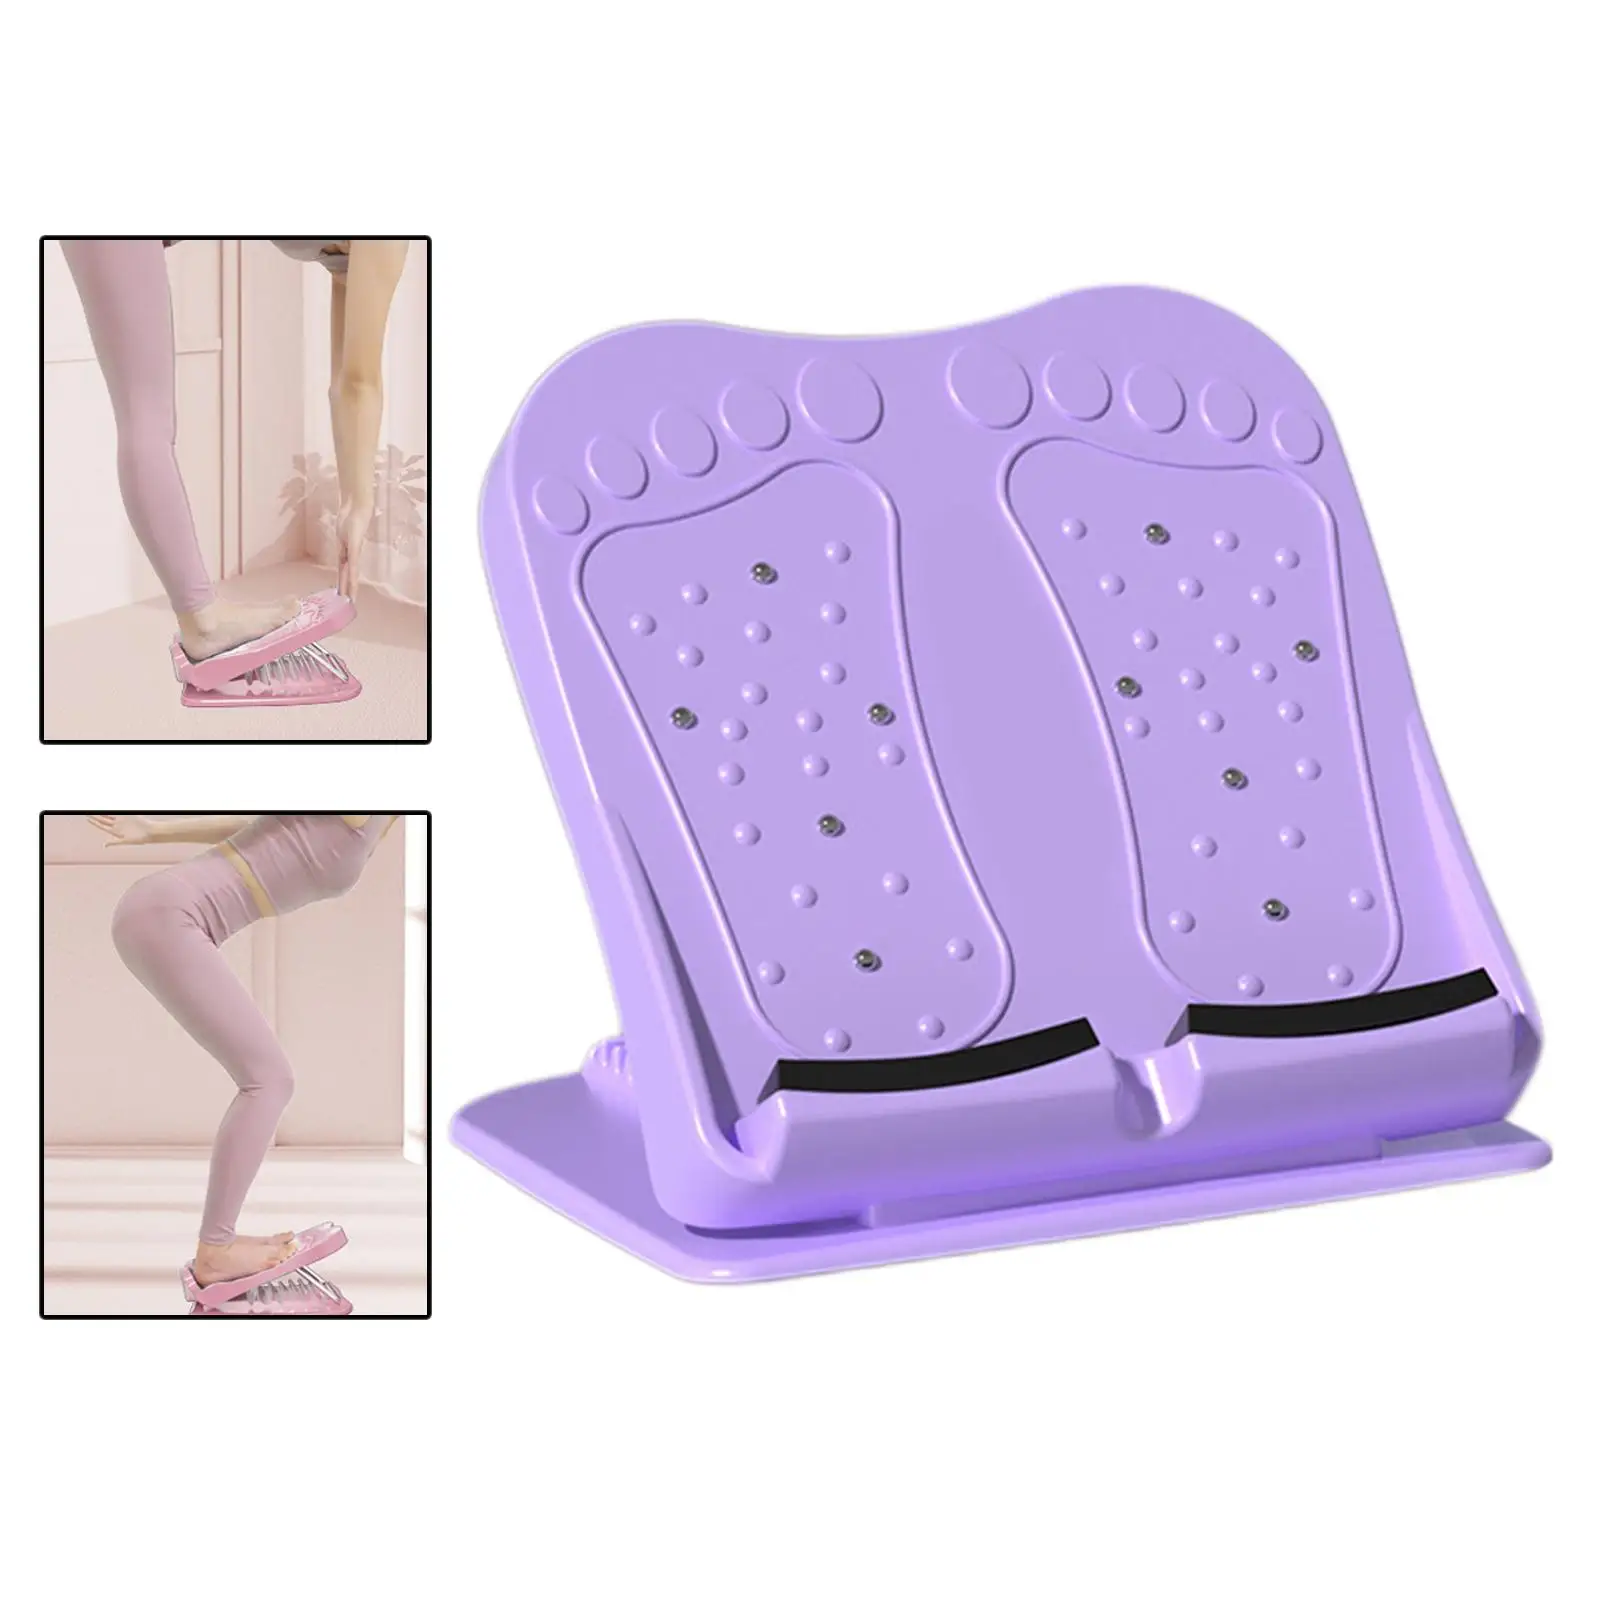 Slant Board Calf Stretcher Adjustable Calf Stretch Wedge Fitness Pedal for